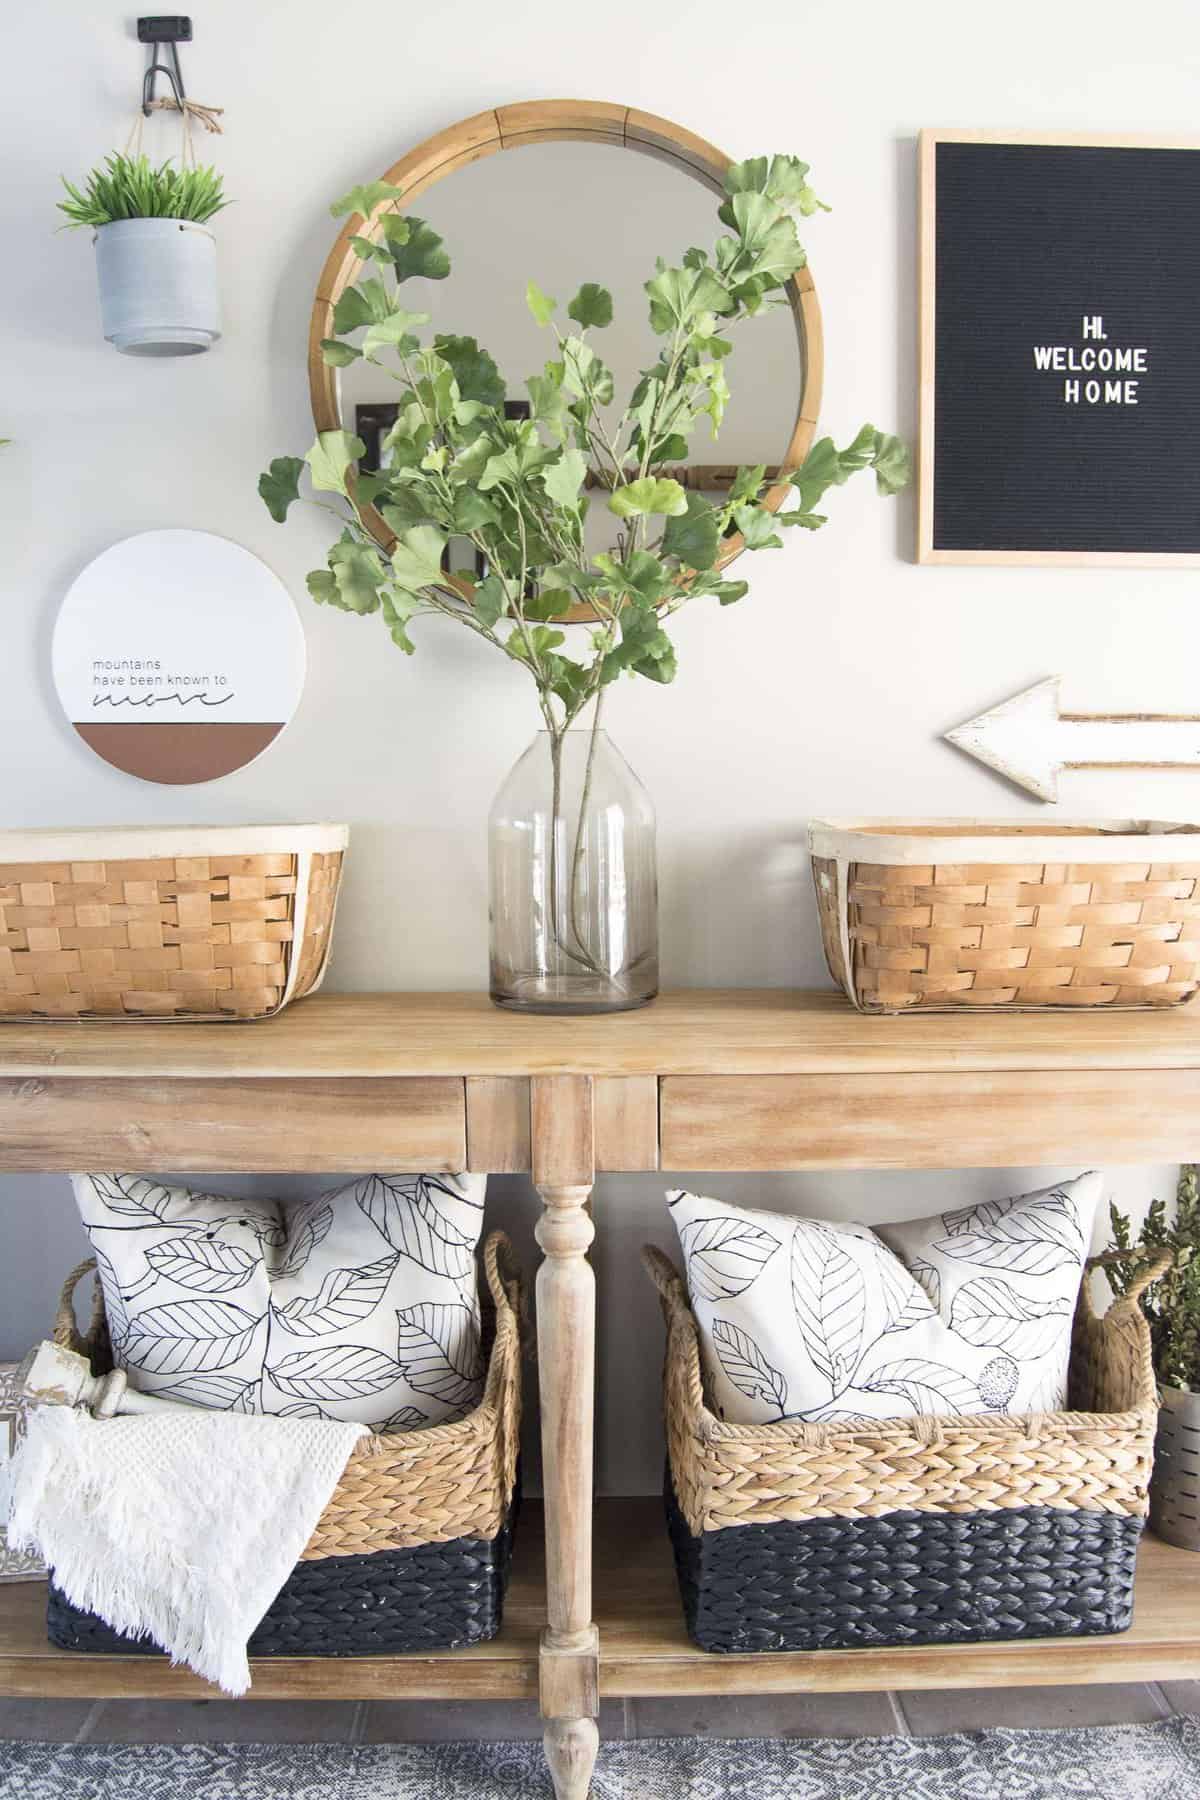 Are you looking for ideas for spring home decor? In my 2018 spring home tour I have some simple ways to incorporate natural elements, spring colors, and simple accents to get your home ready for spring. Join me on this spring home tour blog hop!